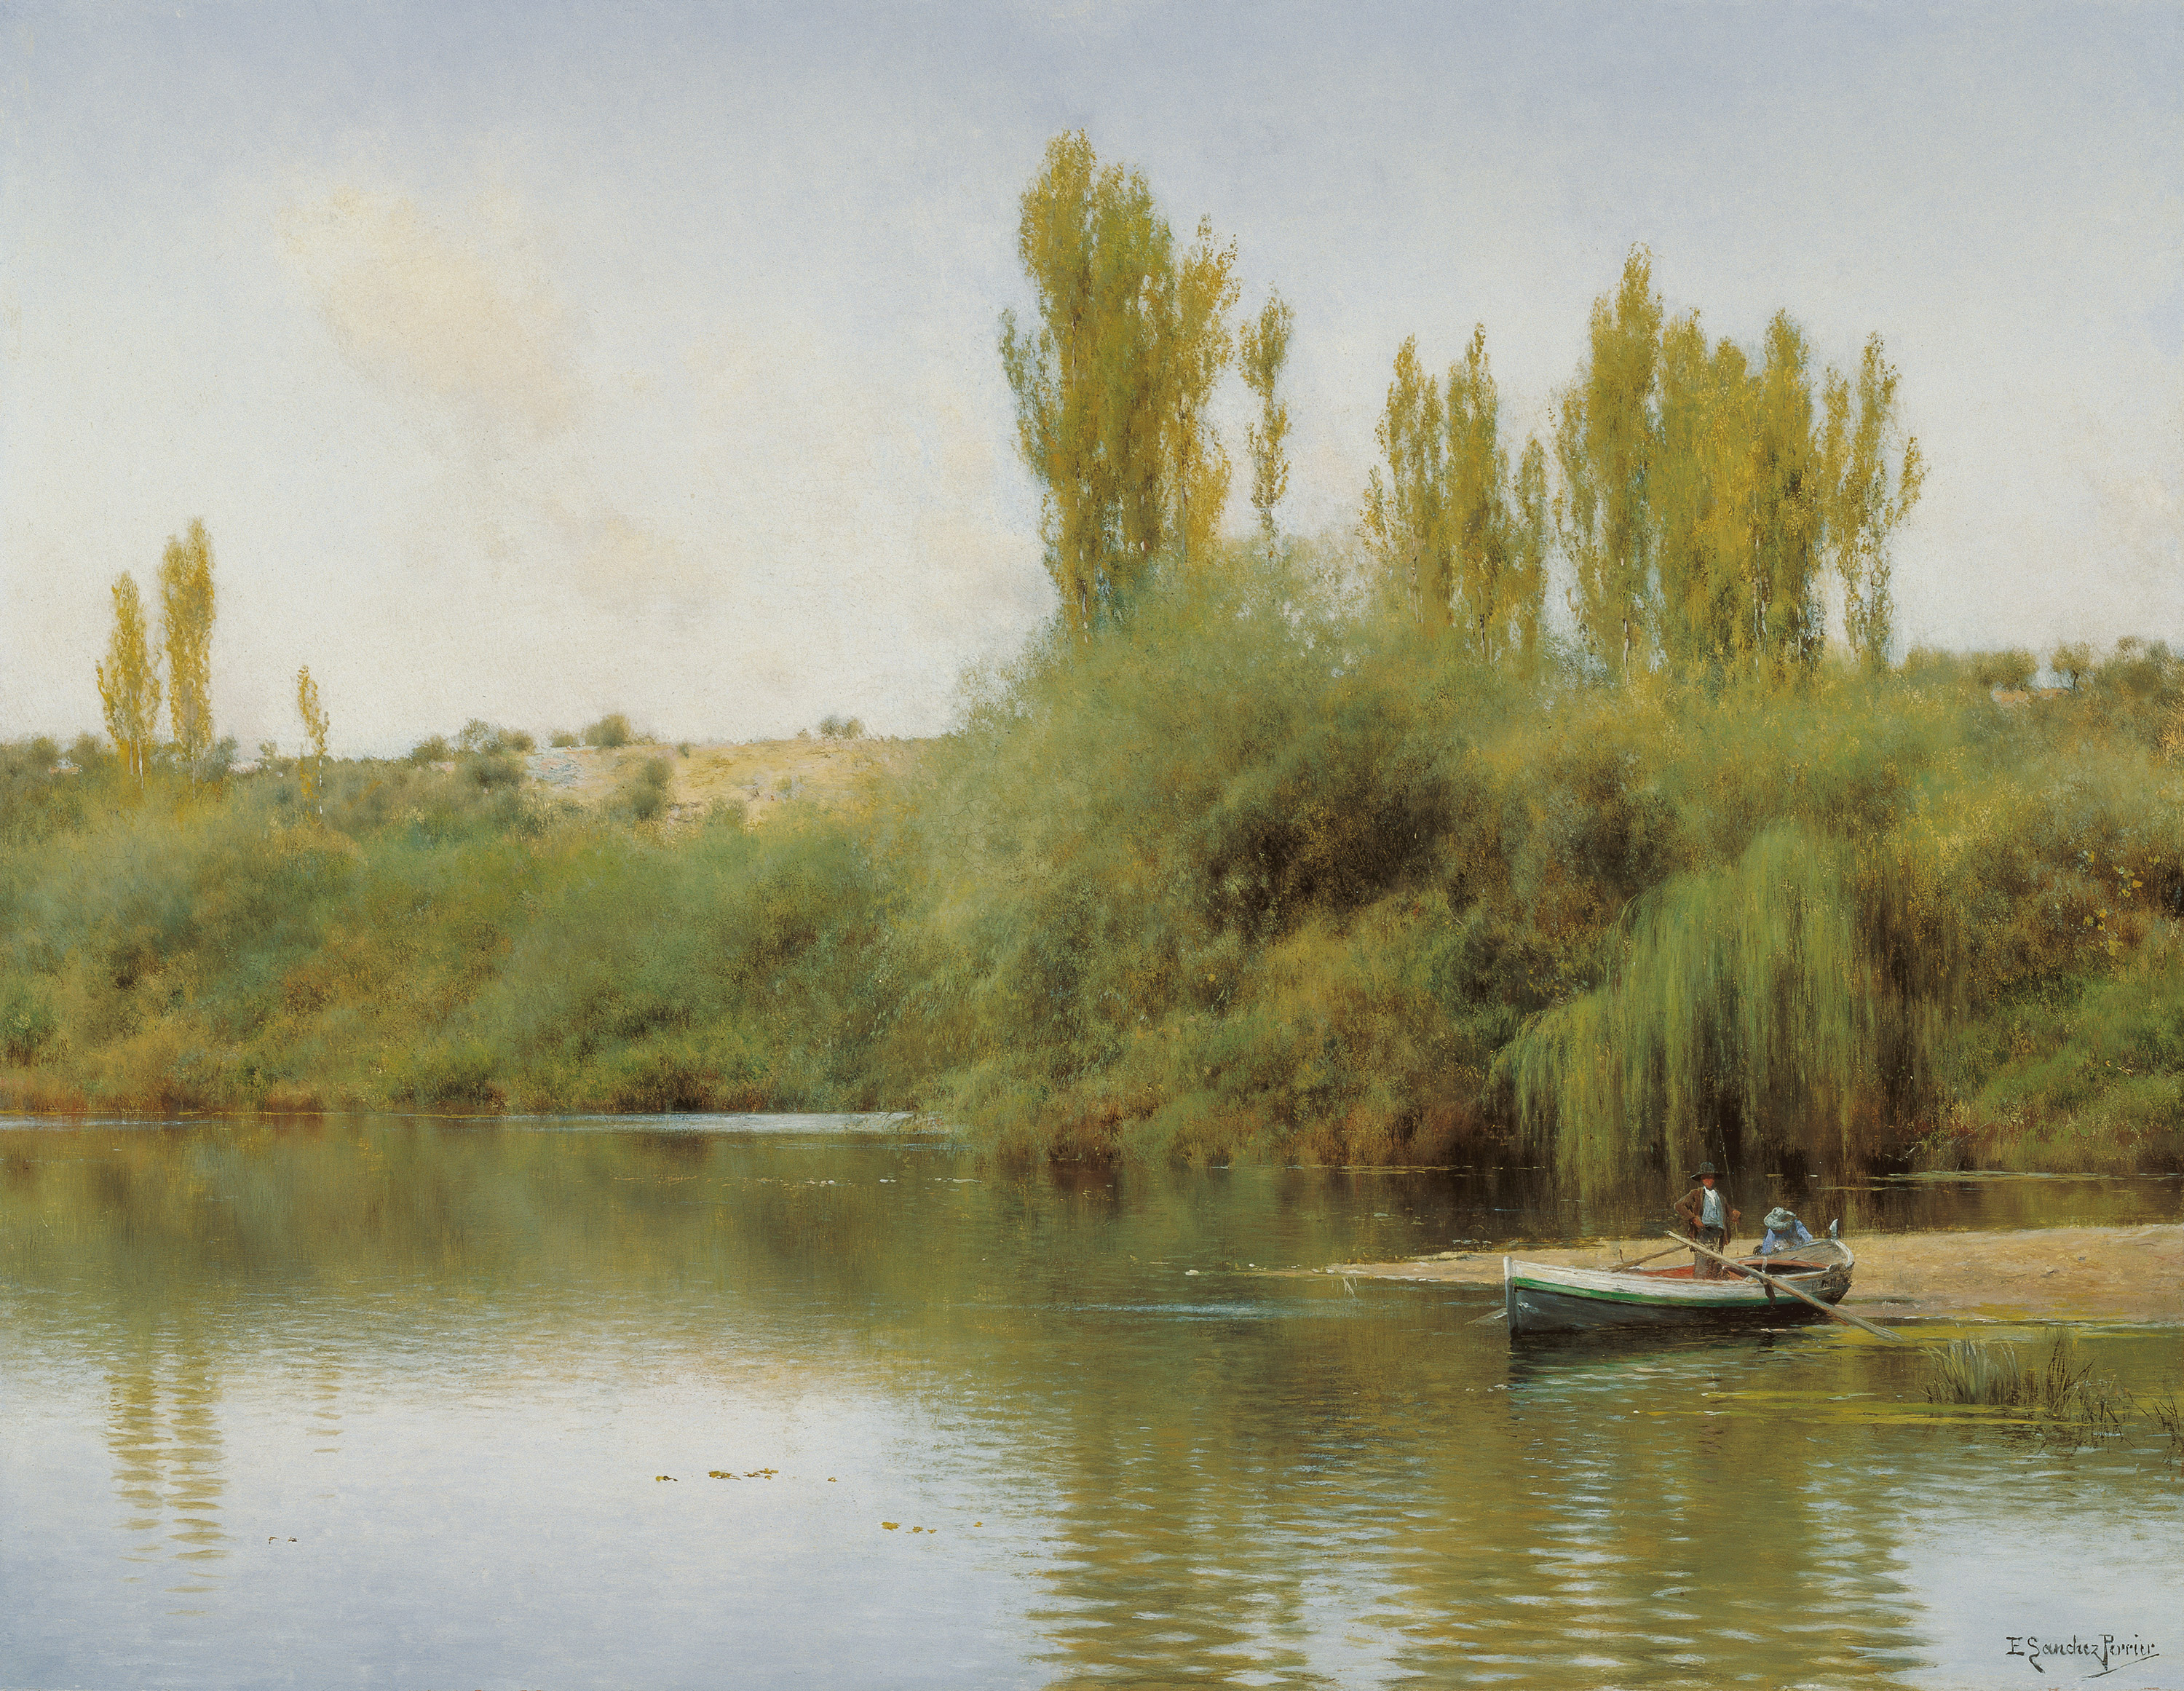 Emilio Sánchez-Perrier Bank of the Guadaira with Boat